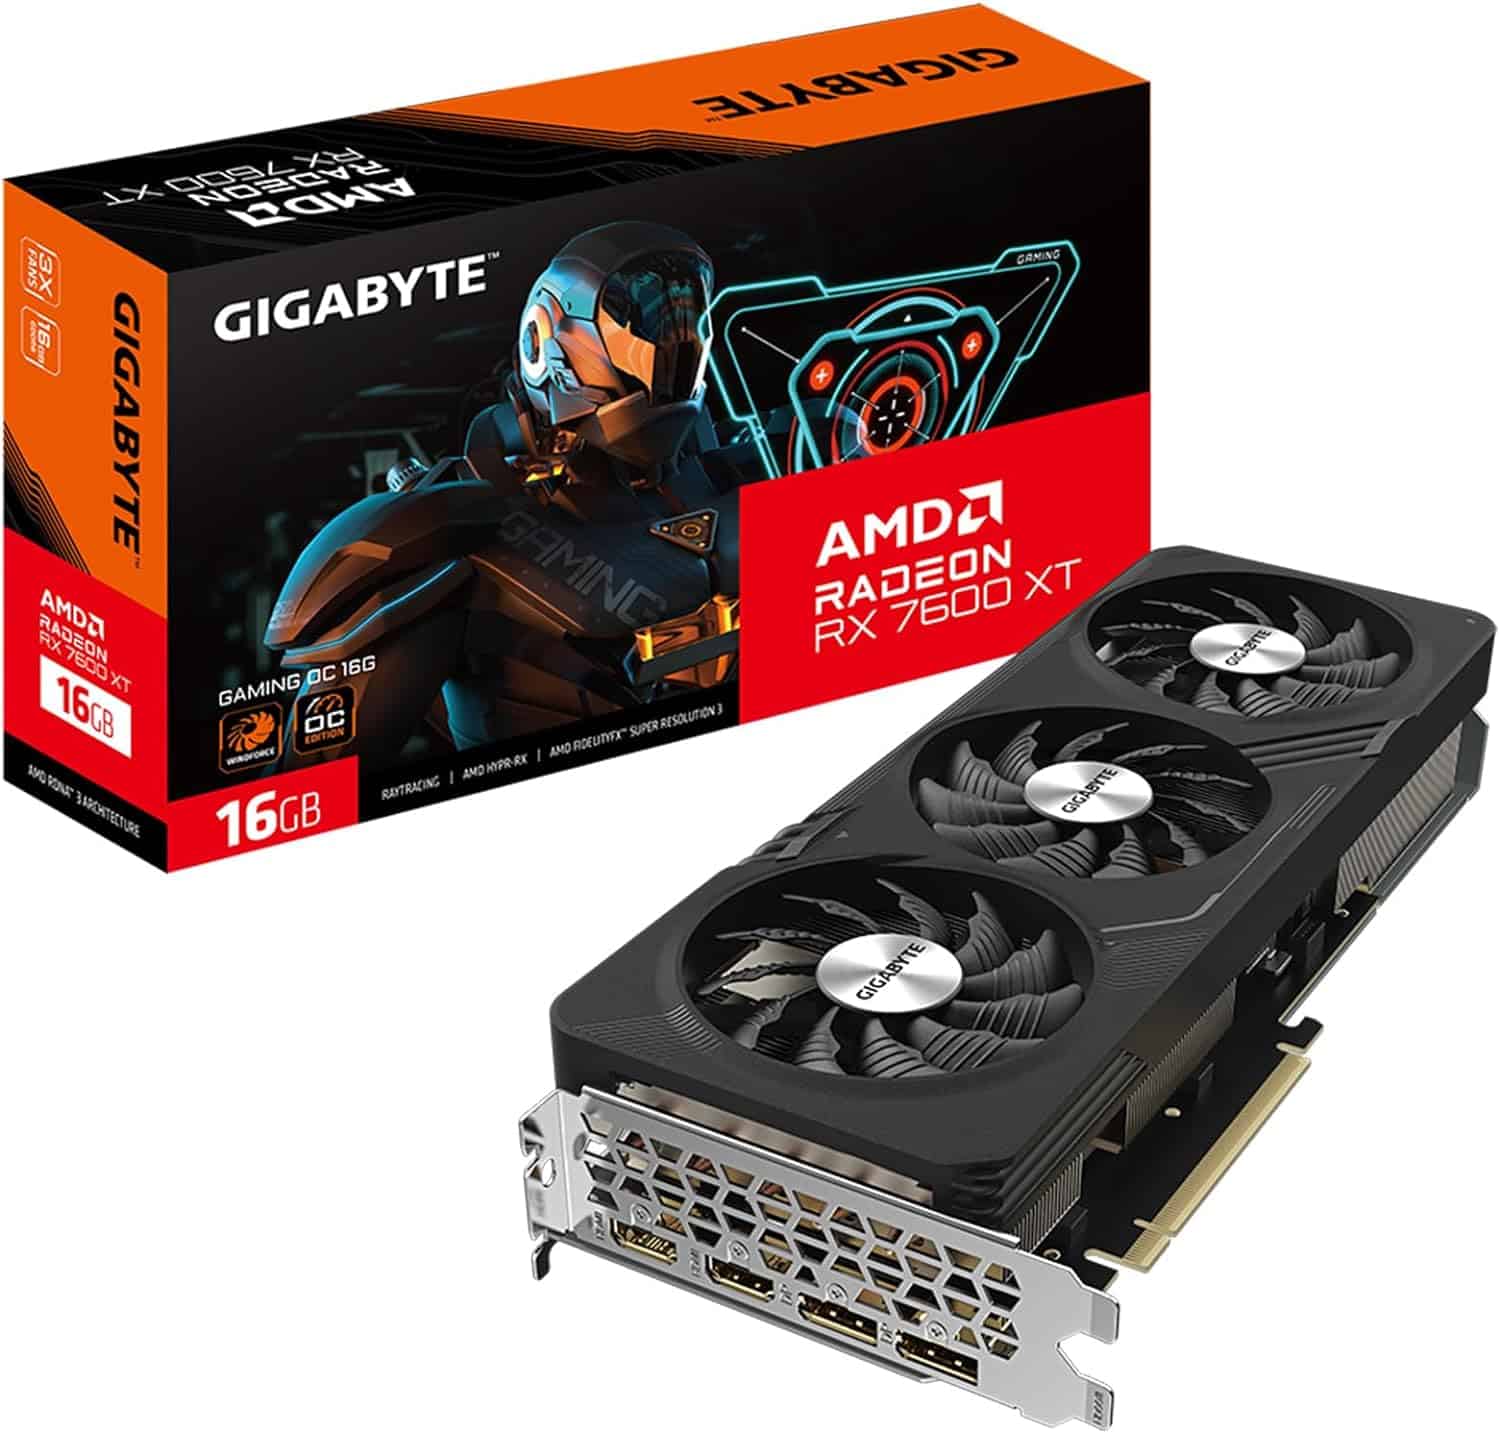 Upgrade your gaming experience with the Gigabyte AMD Radeon R9 290X GTX 1080. This graphics card delivers exceptional performance and stunning visuals for an immersive gaming session.